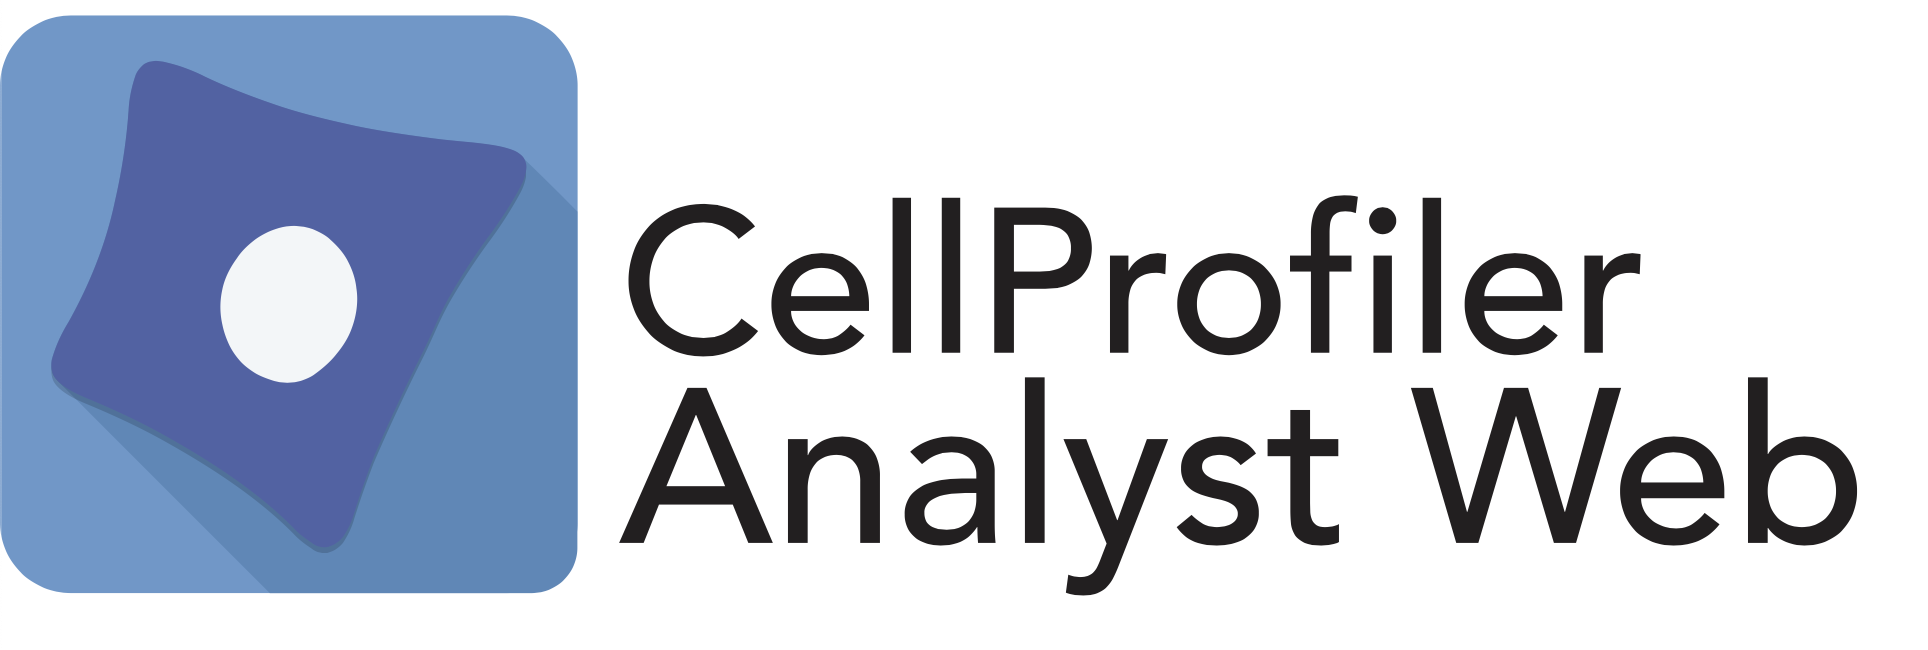 cellprofiler analyst example properties file